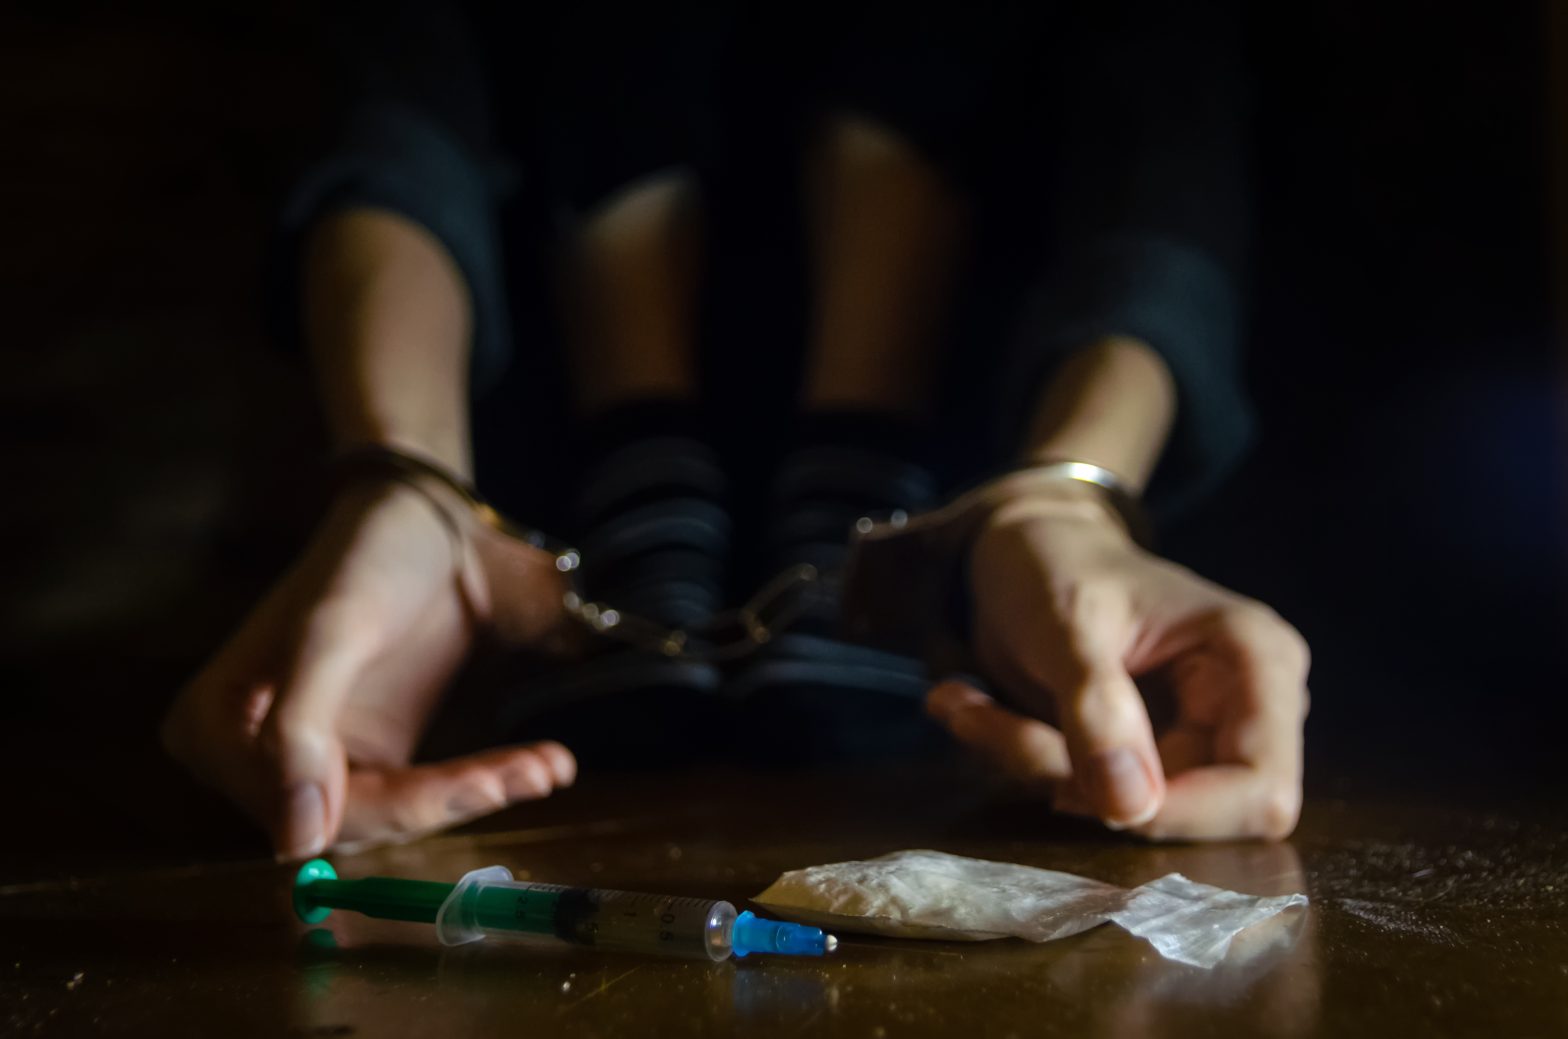 Cuffed hands in front of illegal drugs. Jefferson Country jails